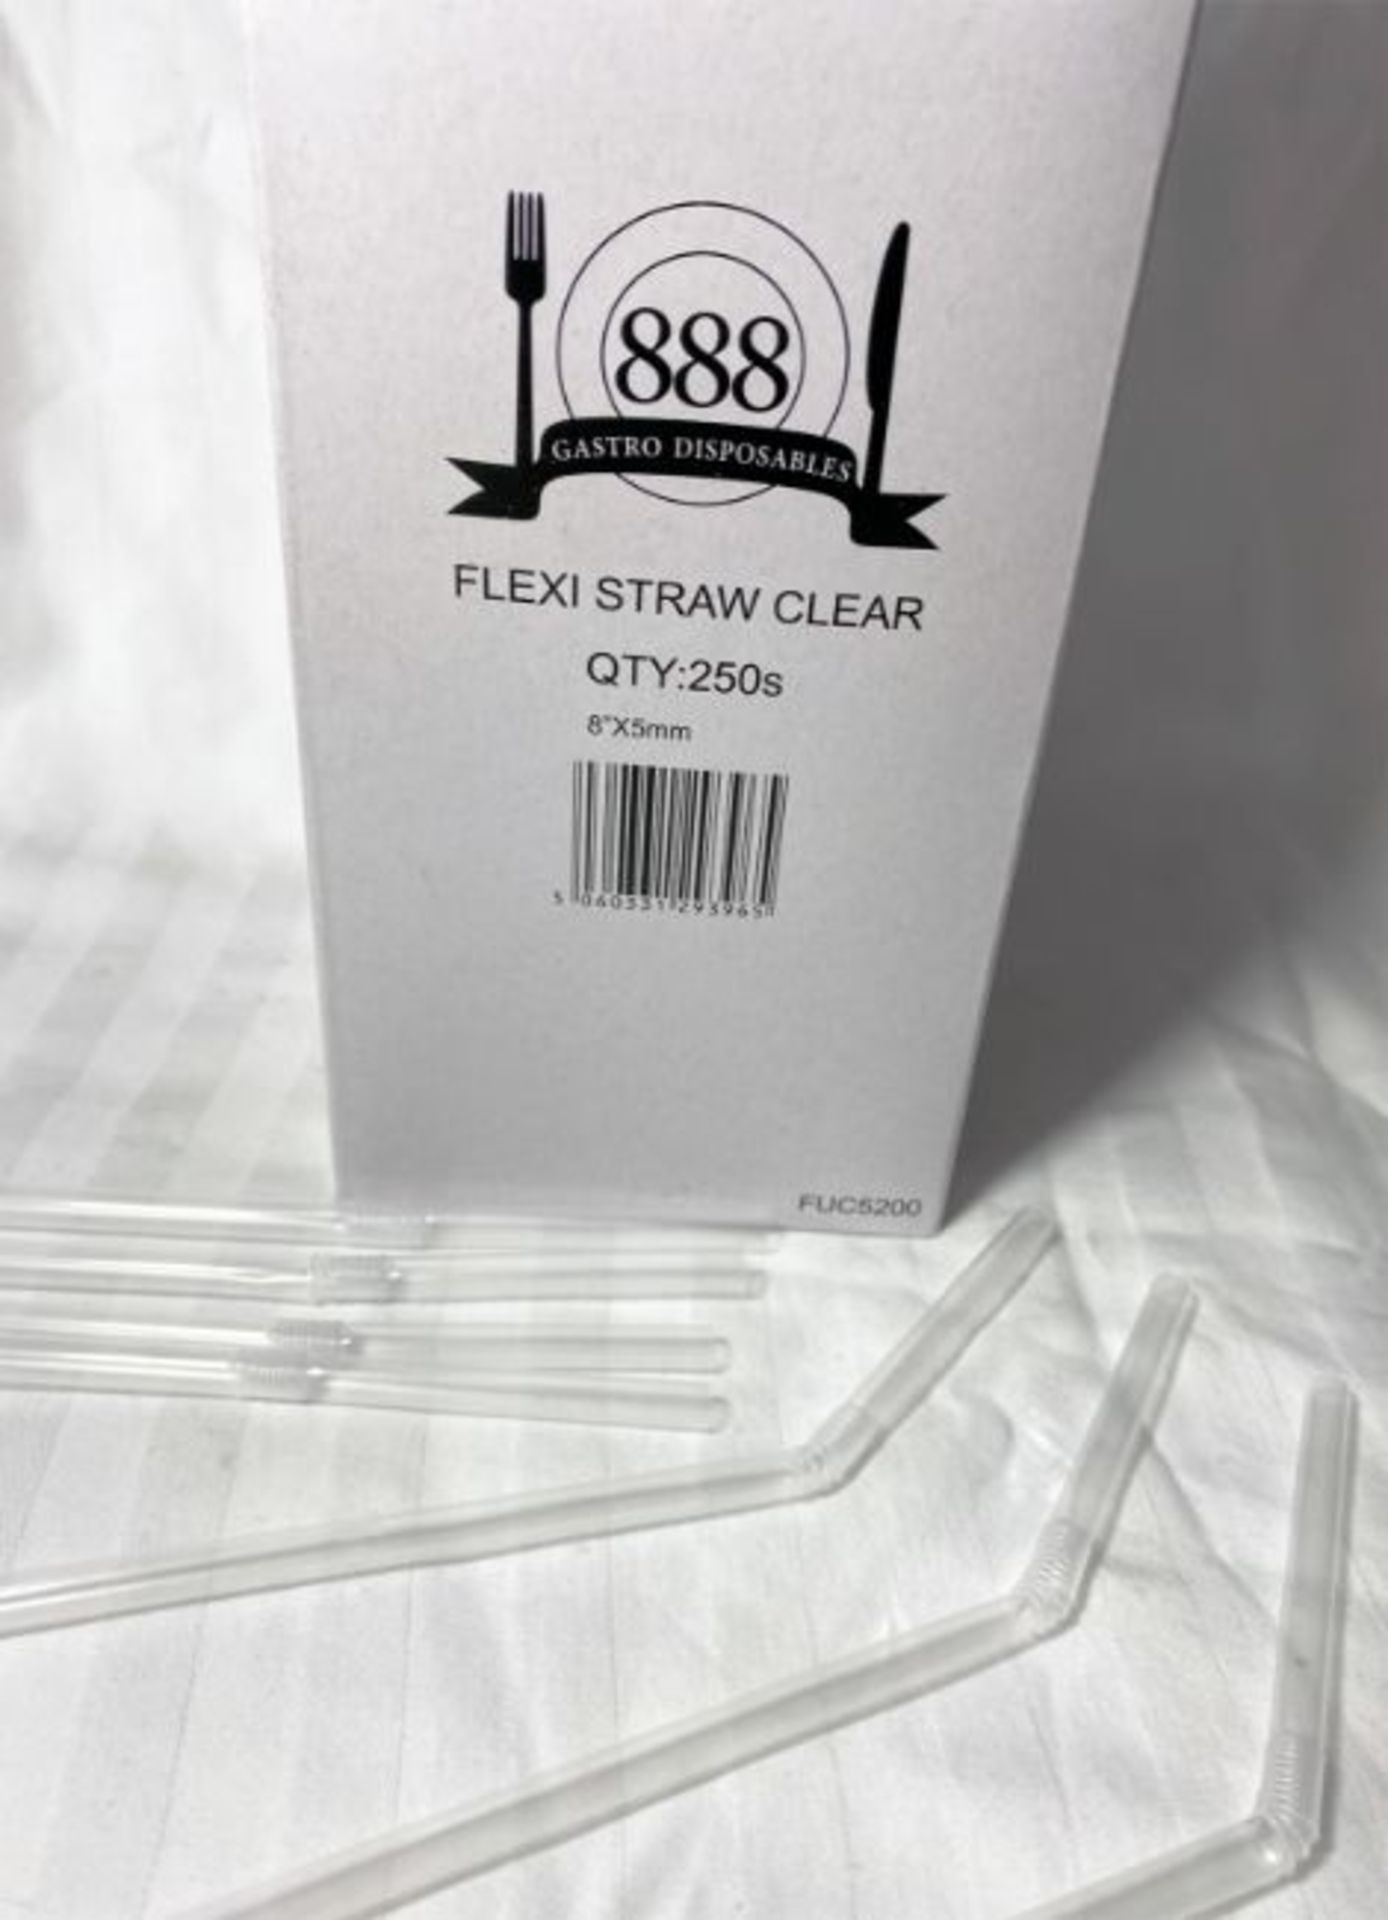 PALLET CONTAINING 360000CLEAR FLEXI STRAWS 8" X 5MM COLLECTION RADCLIFFE - Image 2 of 3